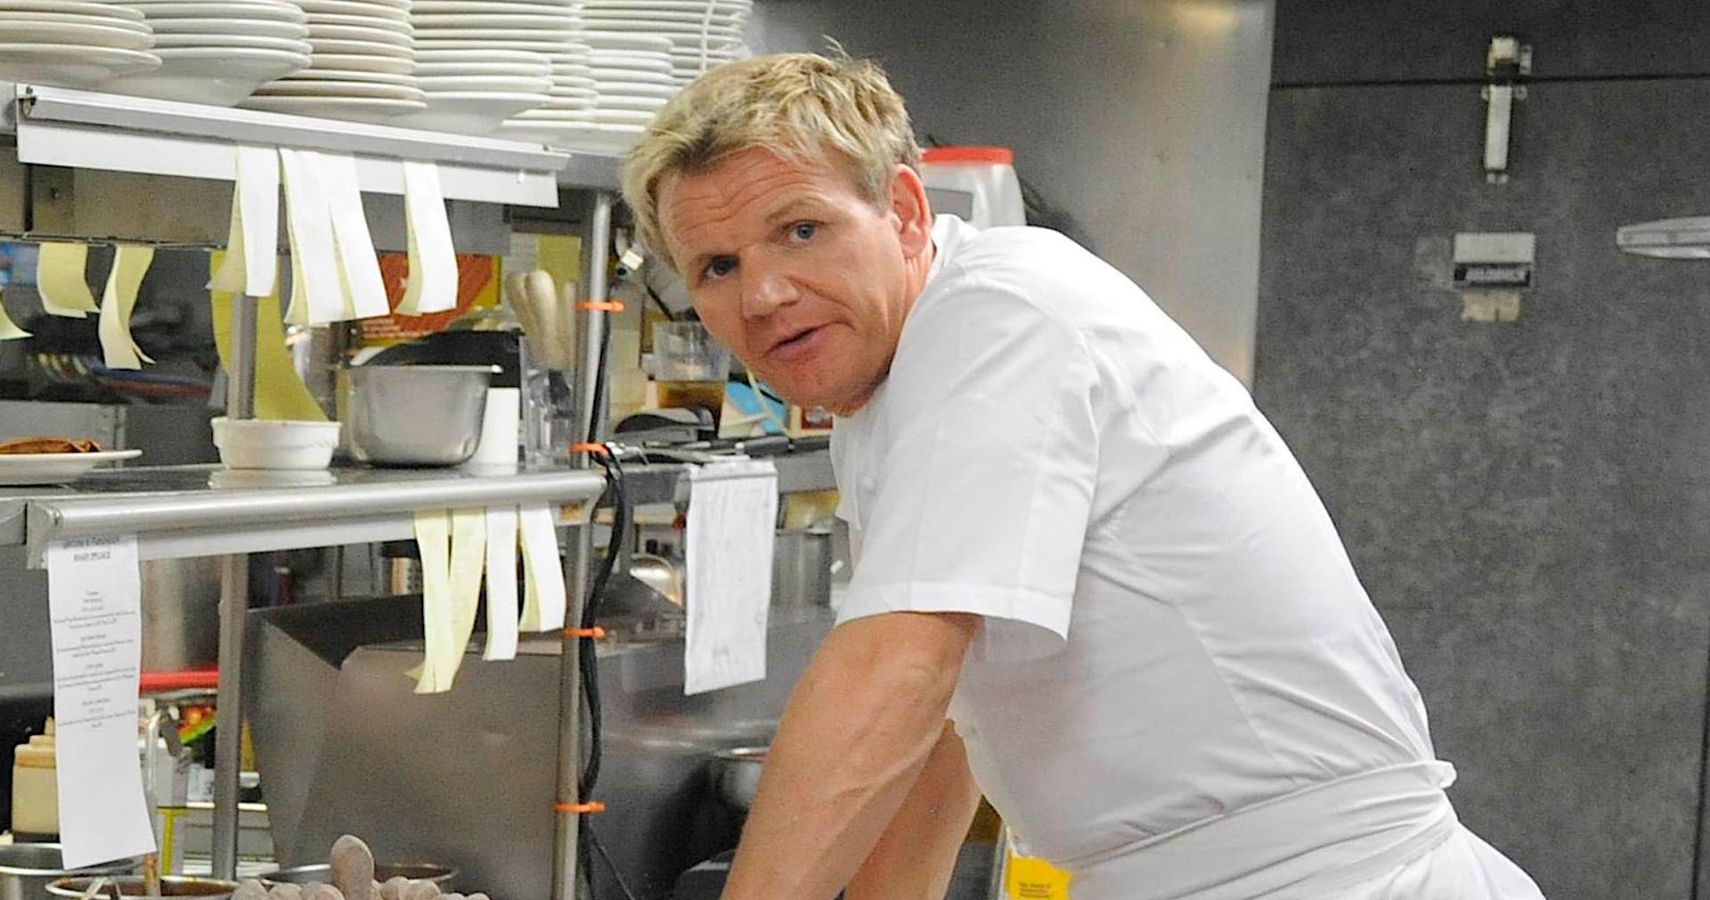 Kitchen Nightmares 10 Funniest Quotes From The Show ScreenRant